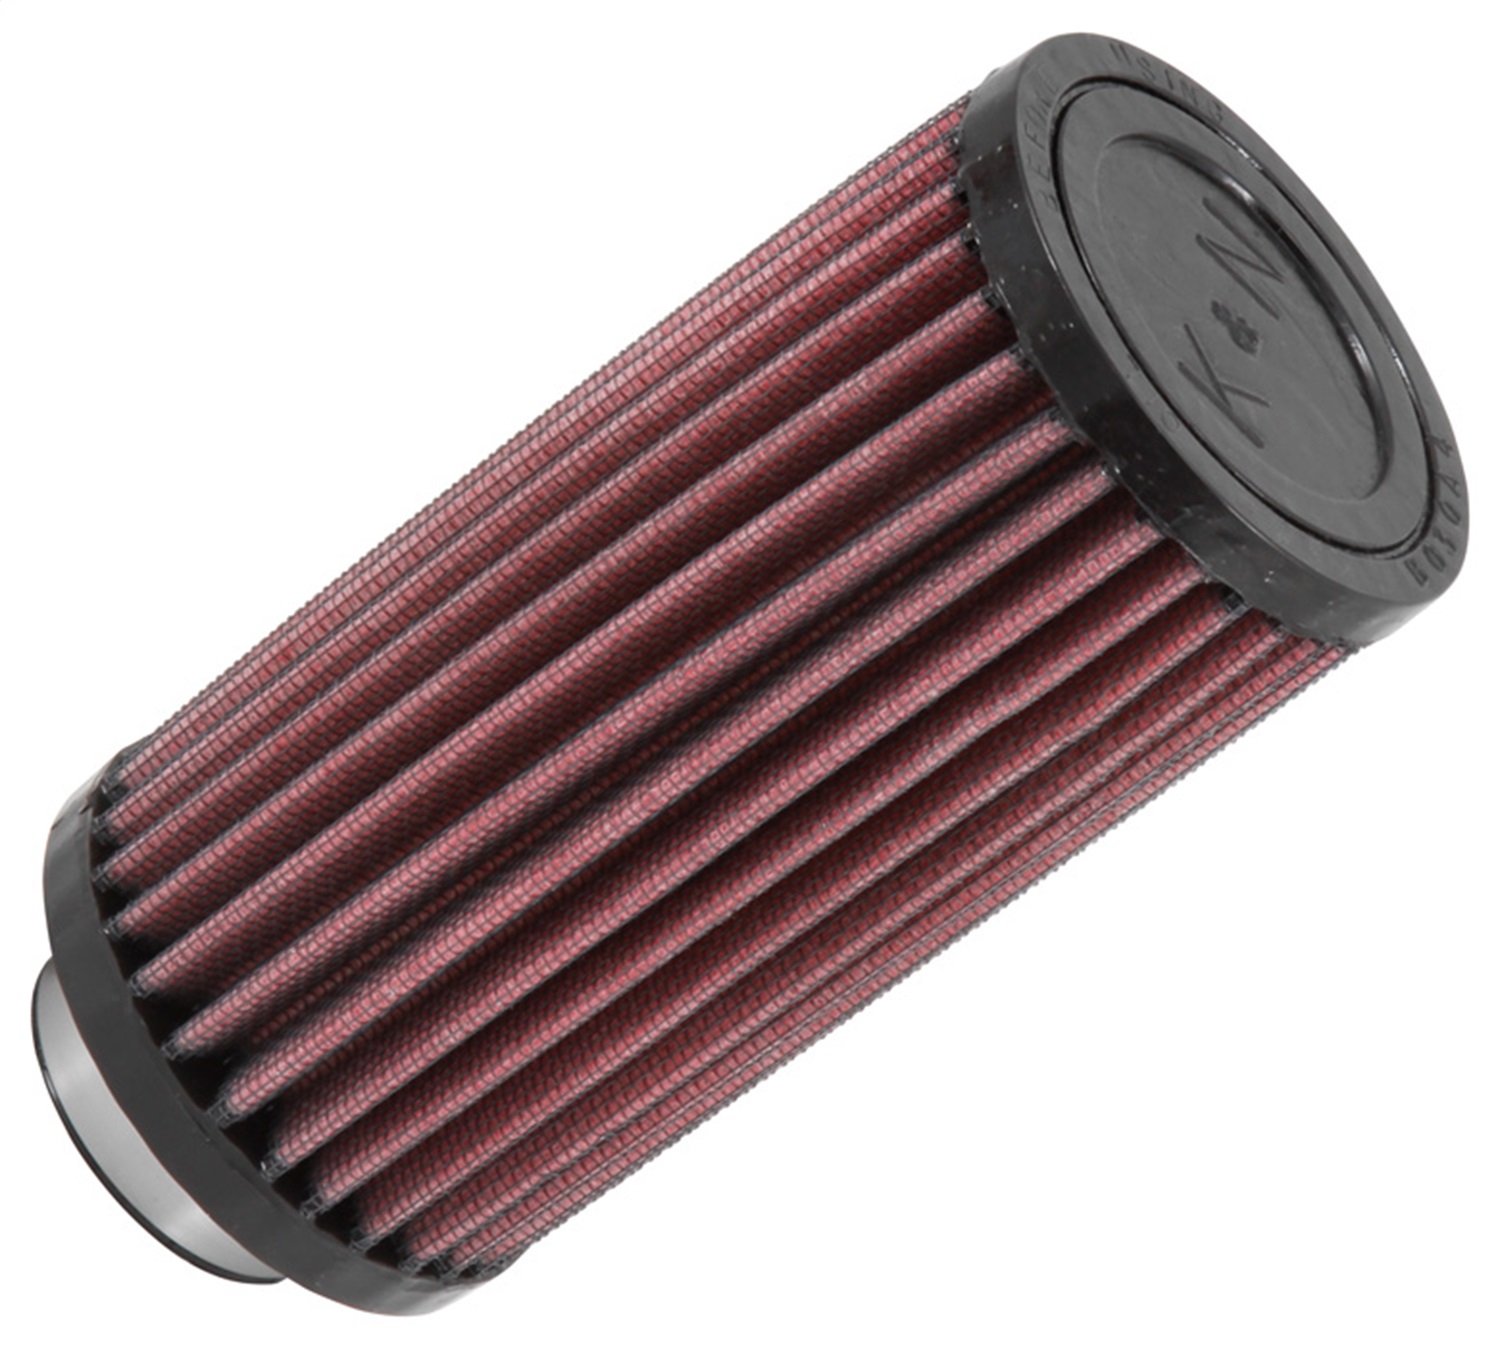 UPC 024844325150 product image for K&N Filters RU-0175 Universal Air Cleaner Assembly | upcitemdb.com